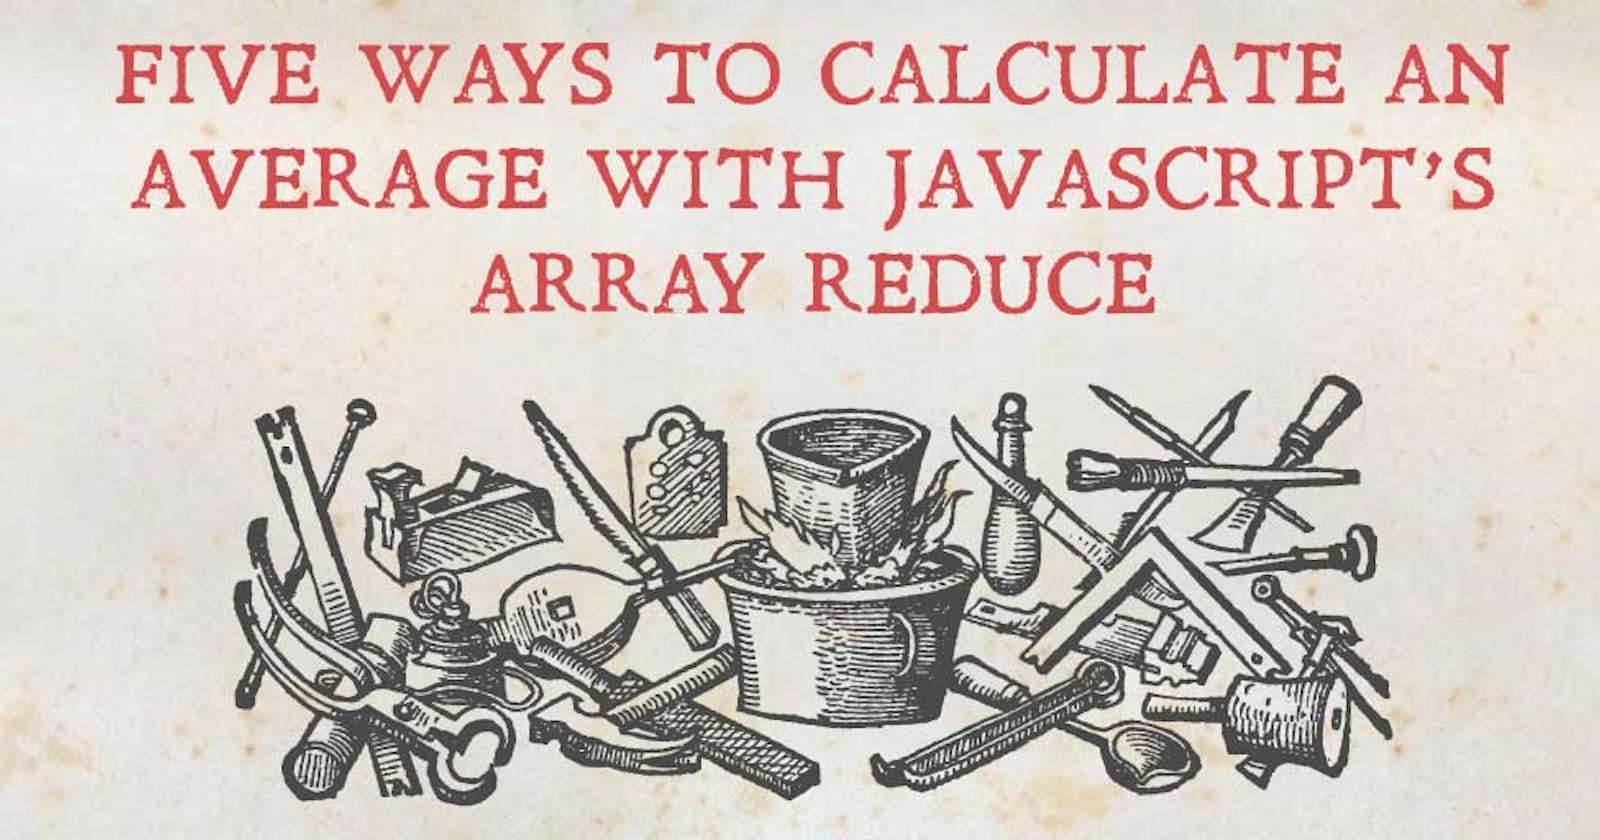 Functional JavaScript: Five ways to calculate an average with array reduce